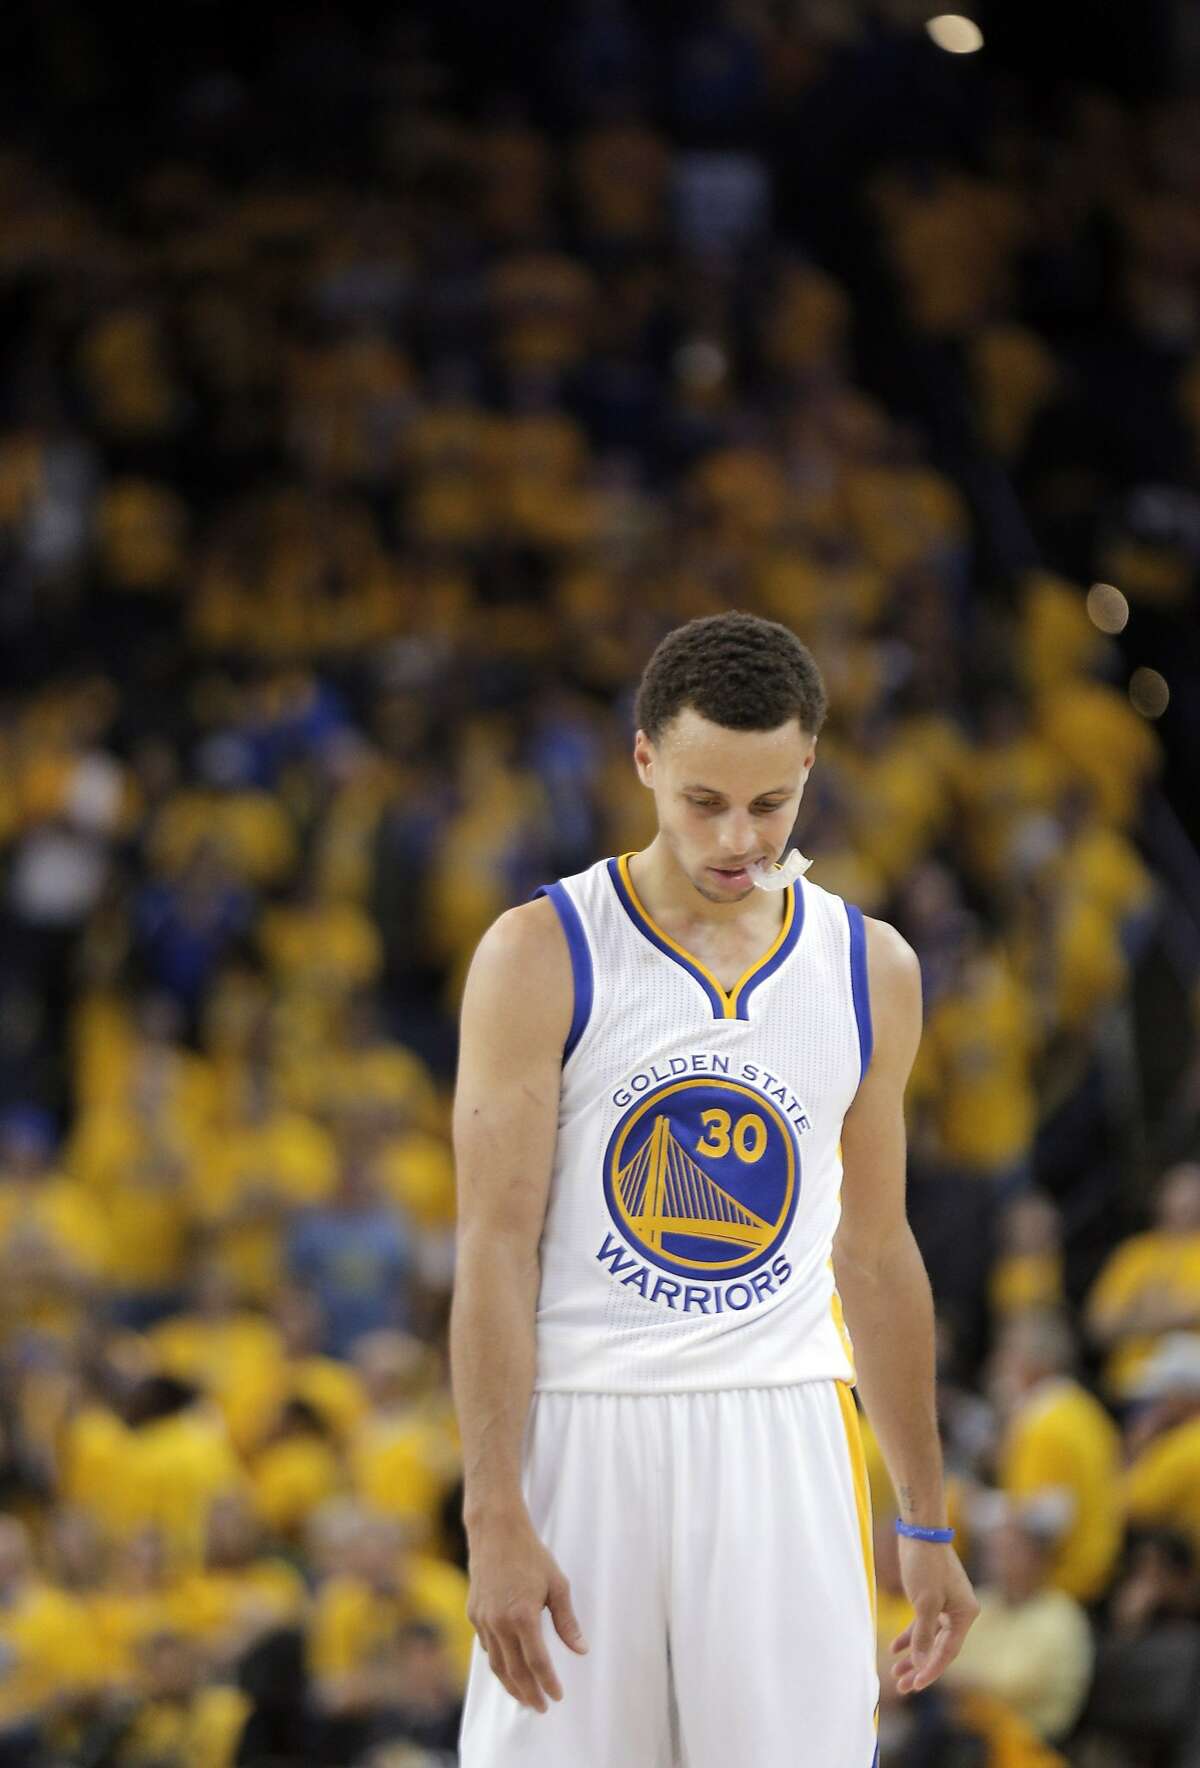 Stephen Curry (30) walks up the court after the Warriors fouled during the final moments of the second half. The Golden State Warriors played the Memphis Grizzlies at Oracle Arena in Oakland, Calif., in Game 2 of the Western Conference Semifinals on Tuesday, May 5, 2015.